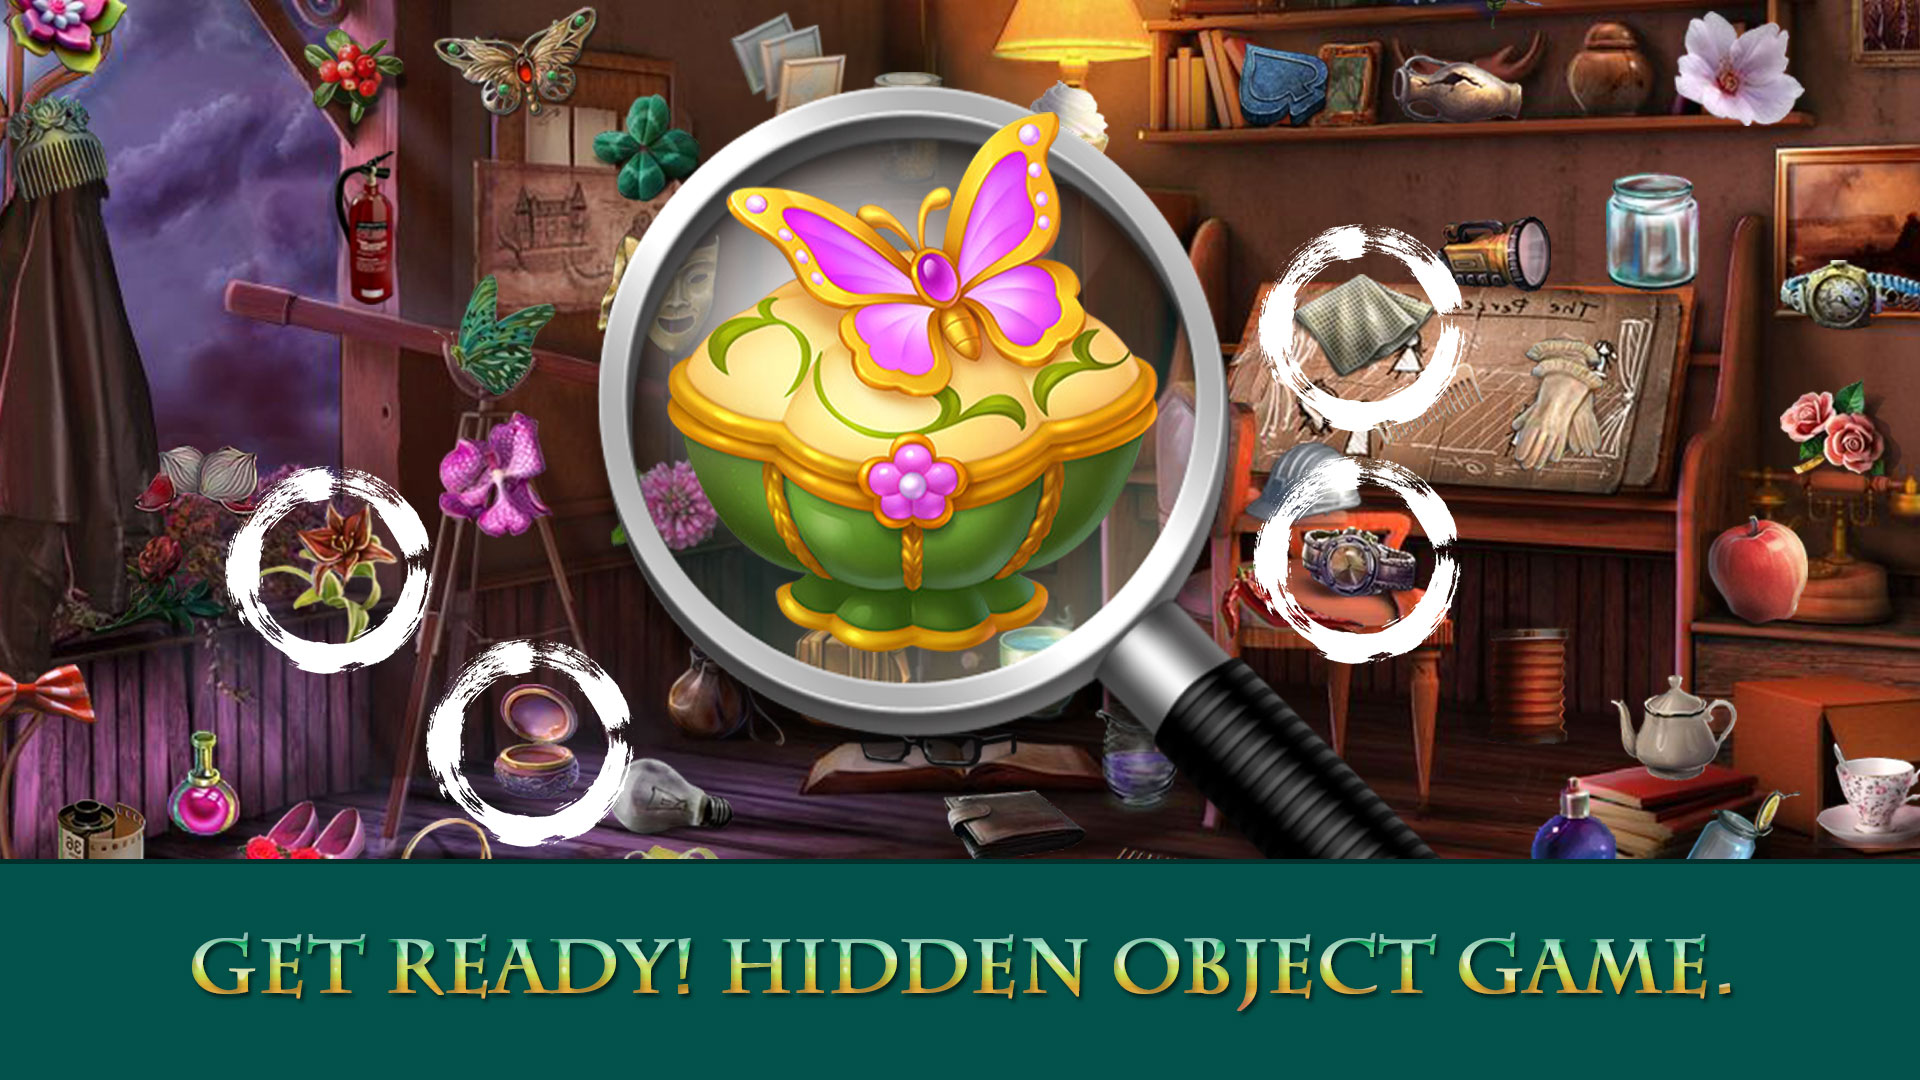 10 best hidden object games for Android - Android Authority